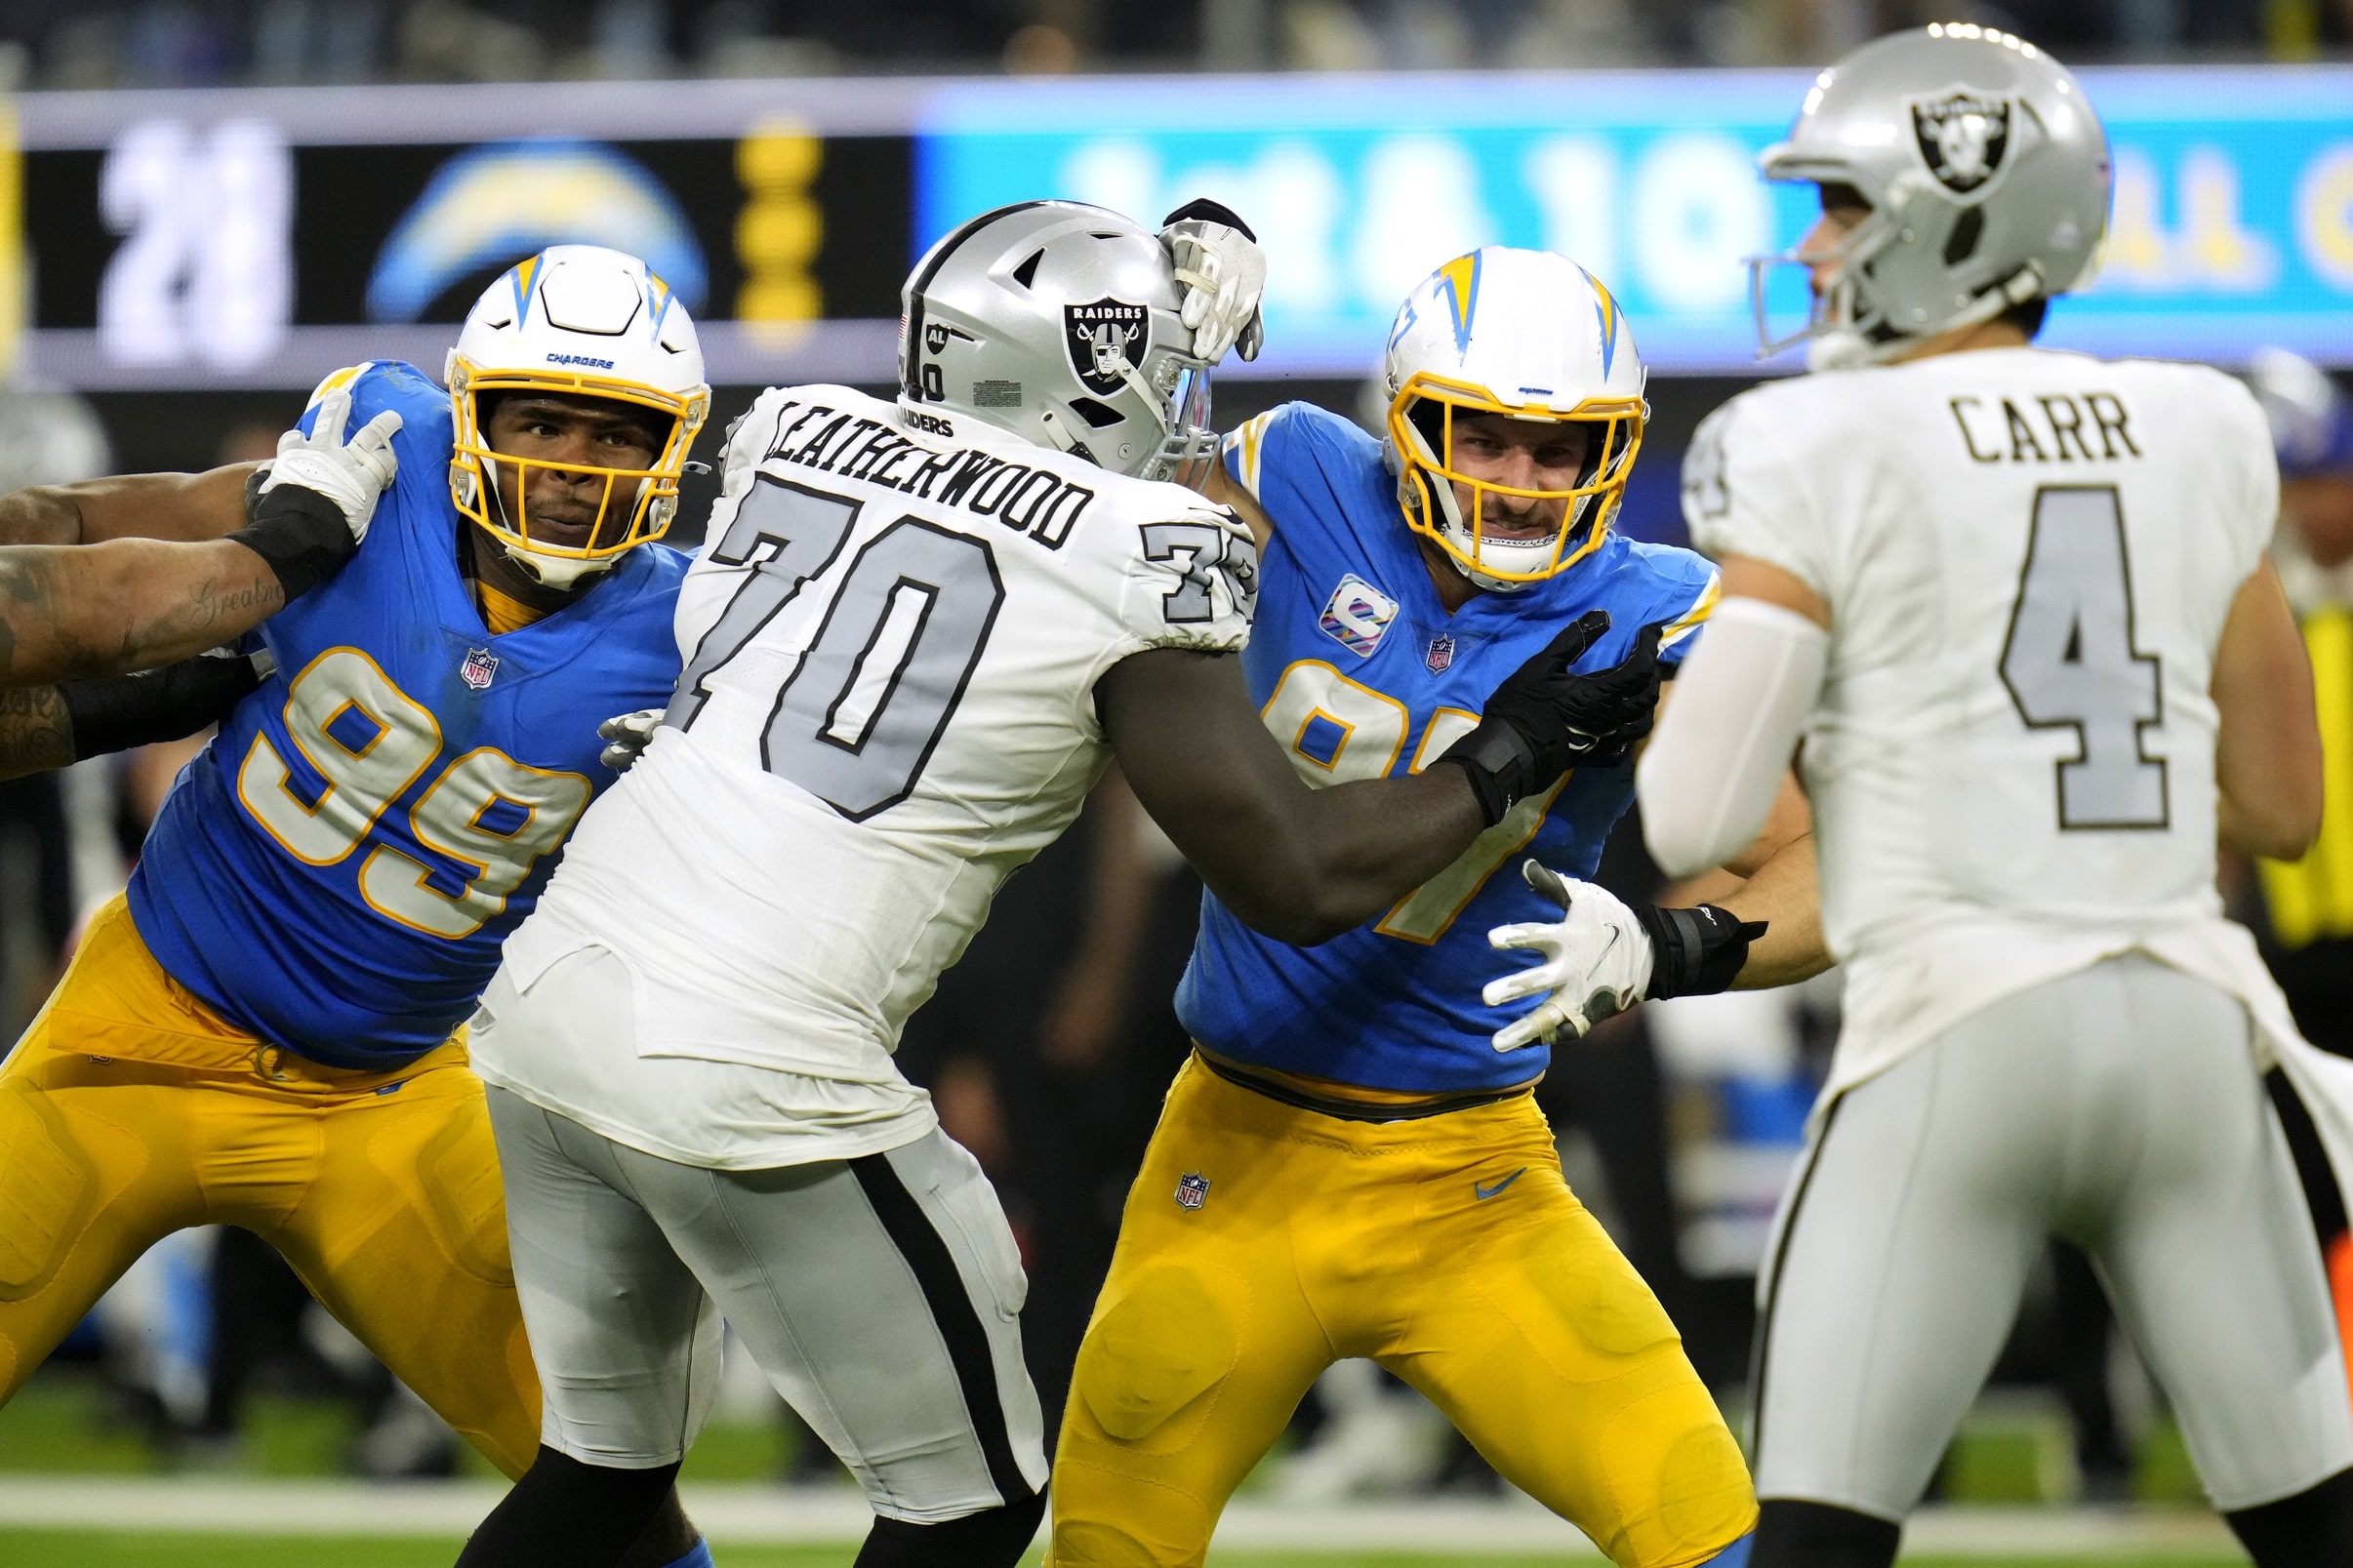 os Angeles Chargers defensive tackle Jerry Tillery (99) and defensive end Joey Bosa (97) battle against Las Vegas Raiders offensive tackle Alex Leatherwood (70) as Raiders quarterback Derek Carr (4) looks for a pass.